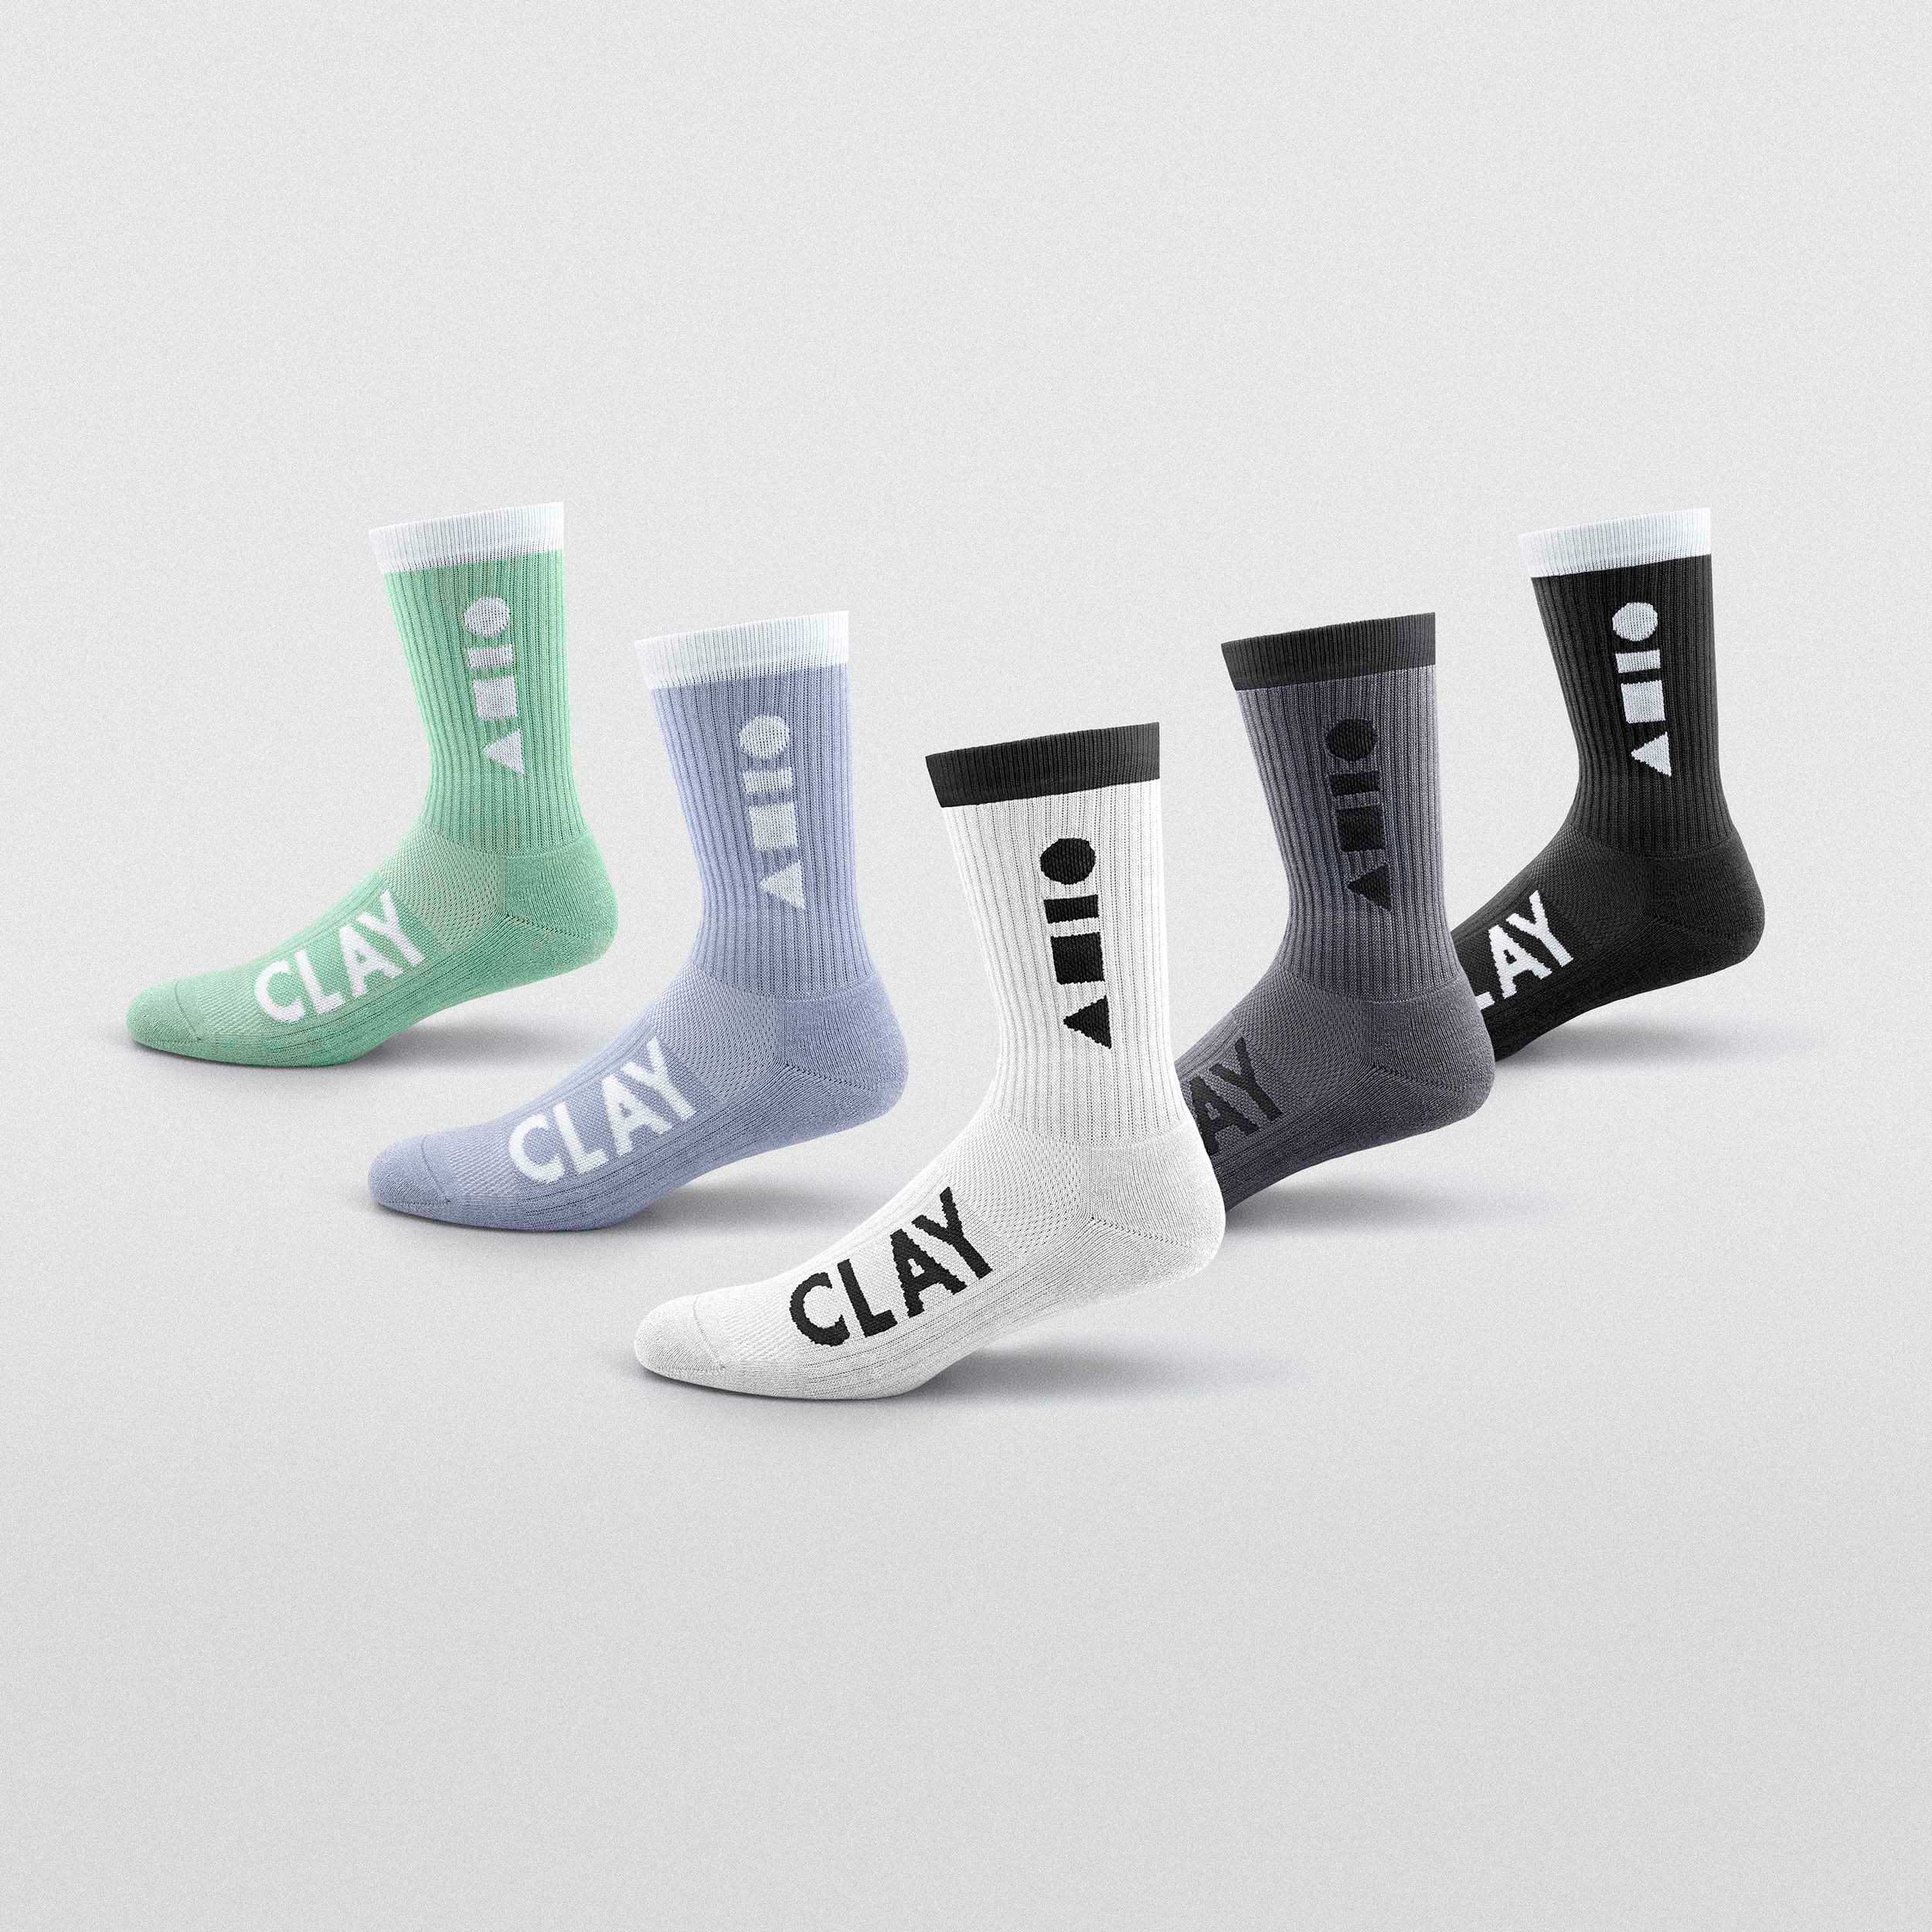 Clay Active crew socks boxset made for the gym, training, running, tennis and basketball. Made in Australia and ethically made with high quality combed cotton. Durable, breathable with excellent blister prevention.